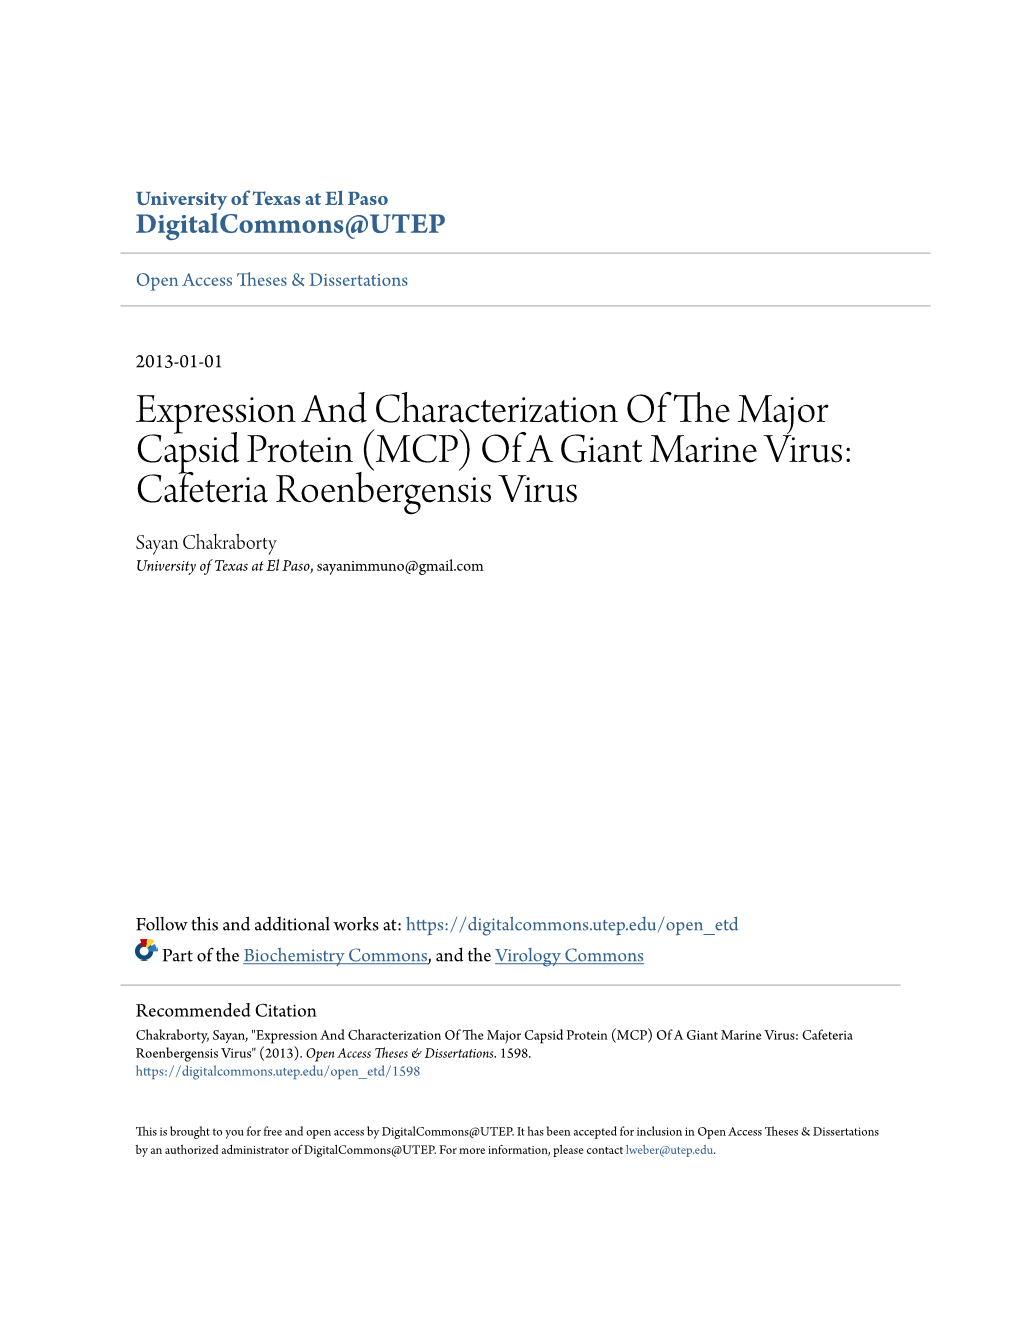 EXPRESSION and CHARACTERIZATION of the MAJOR CAPSID PROTEIN (MCP) of a GIANT MARINE VIRUS: Cafeteria Roenbergensis VIRUS (Crov)